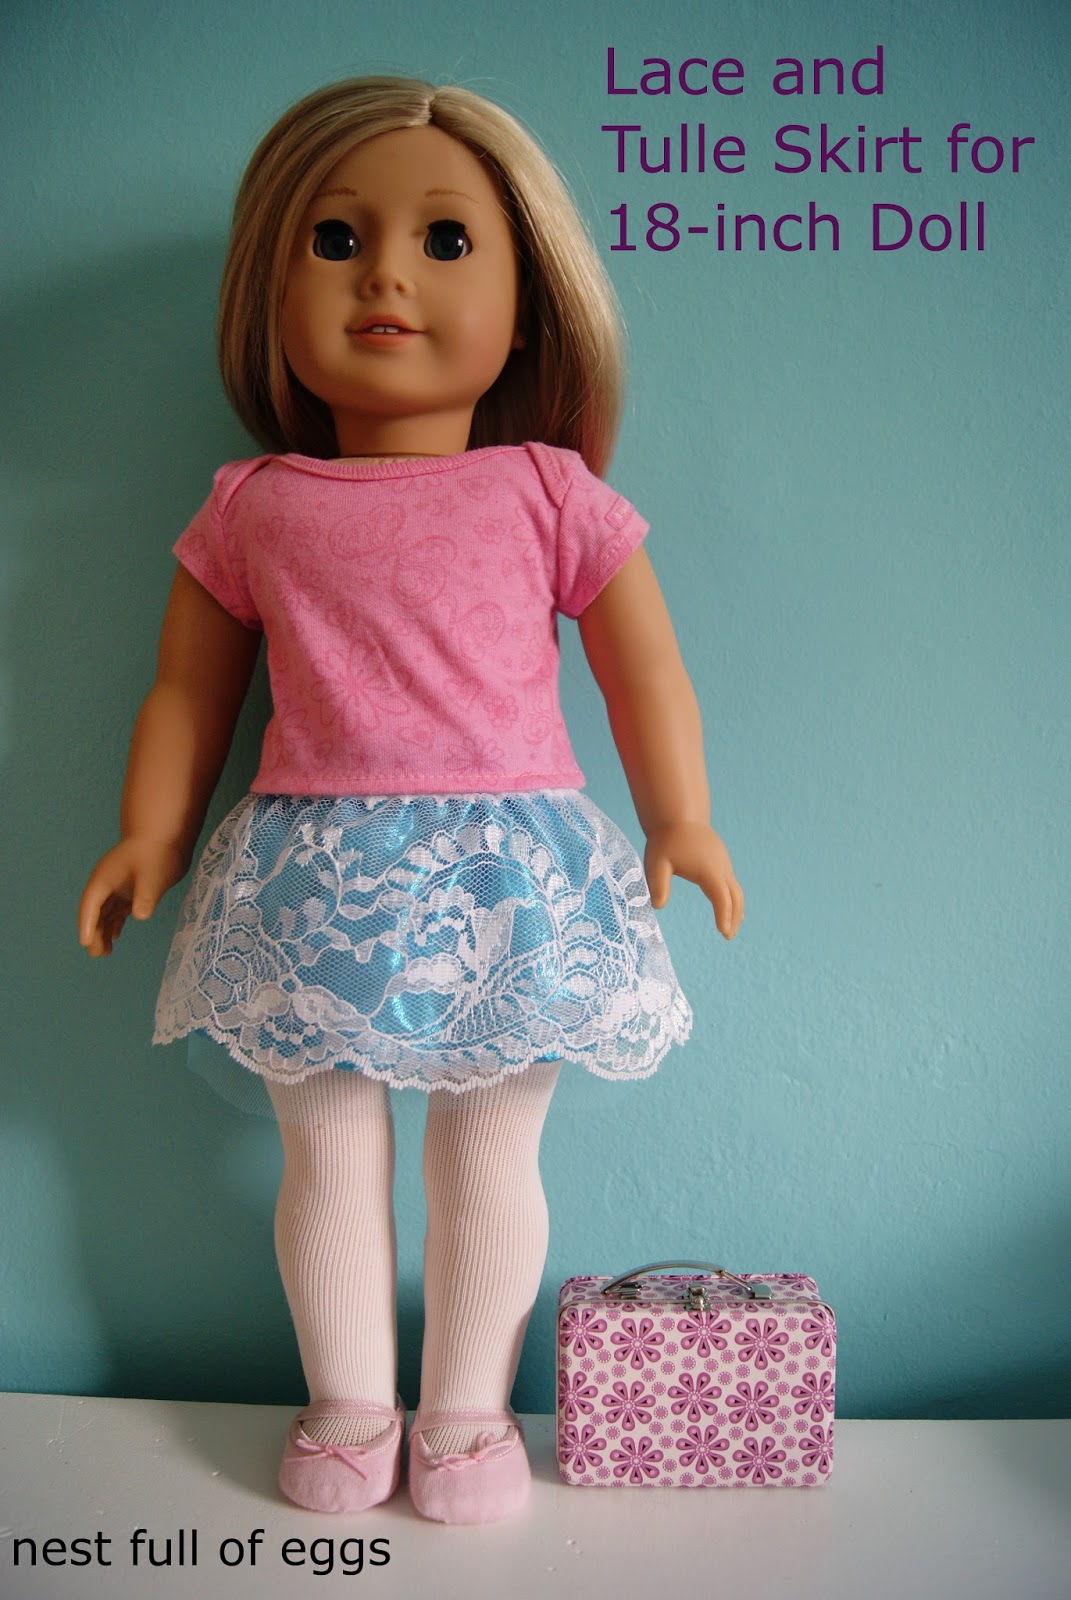 Lace and tulle skirt for 18-inch doll by nest full of eggs